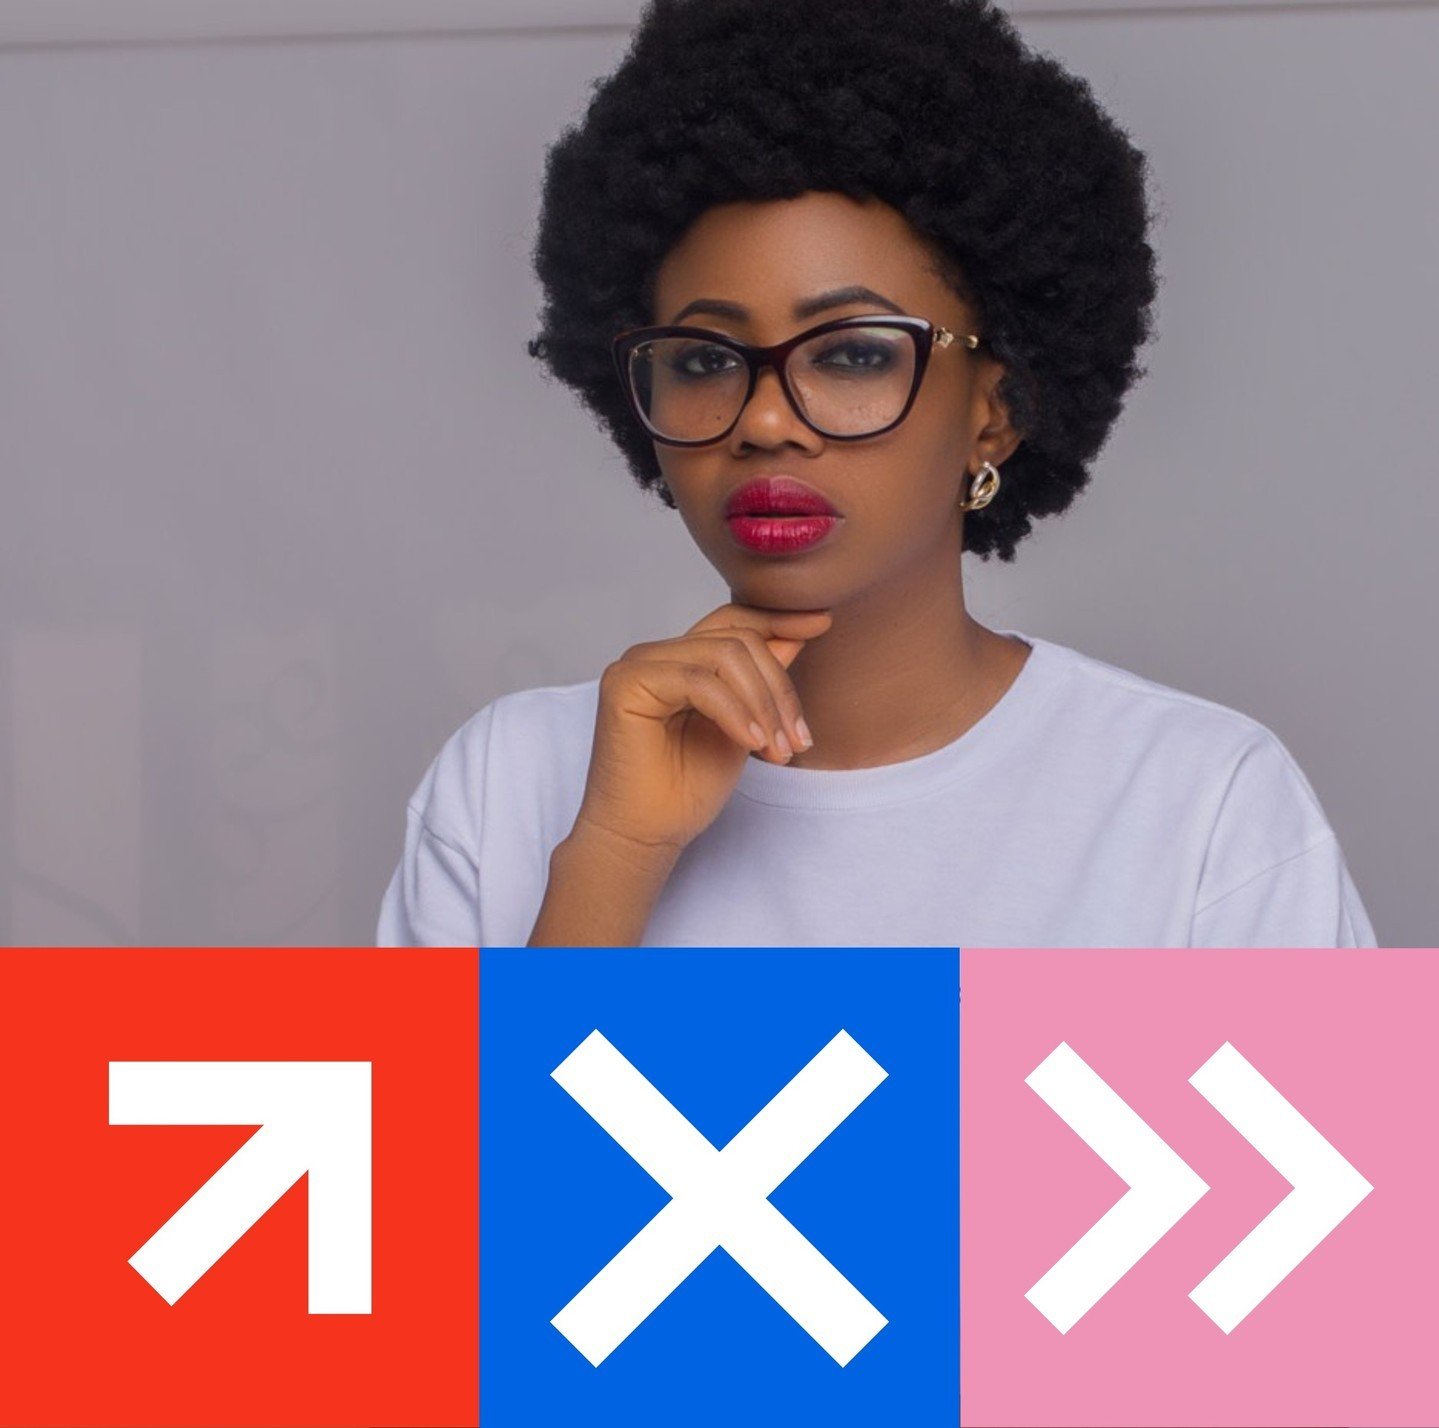 👋 Please meet Padebi Ojomo, founder of Social Media School. She's Nigerian, living in Milton Keynes, United Kingdom. 🇬🇧⁠
⁠
🙌 She stands for and has chosen the symbols of Forward (red), Multiplication (blue) and Forward II (pink) for Her Founderla